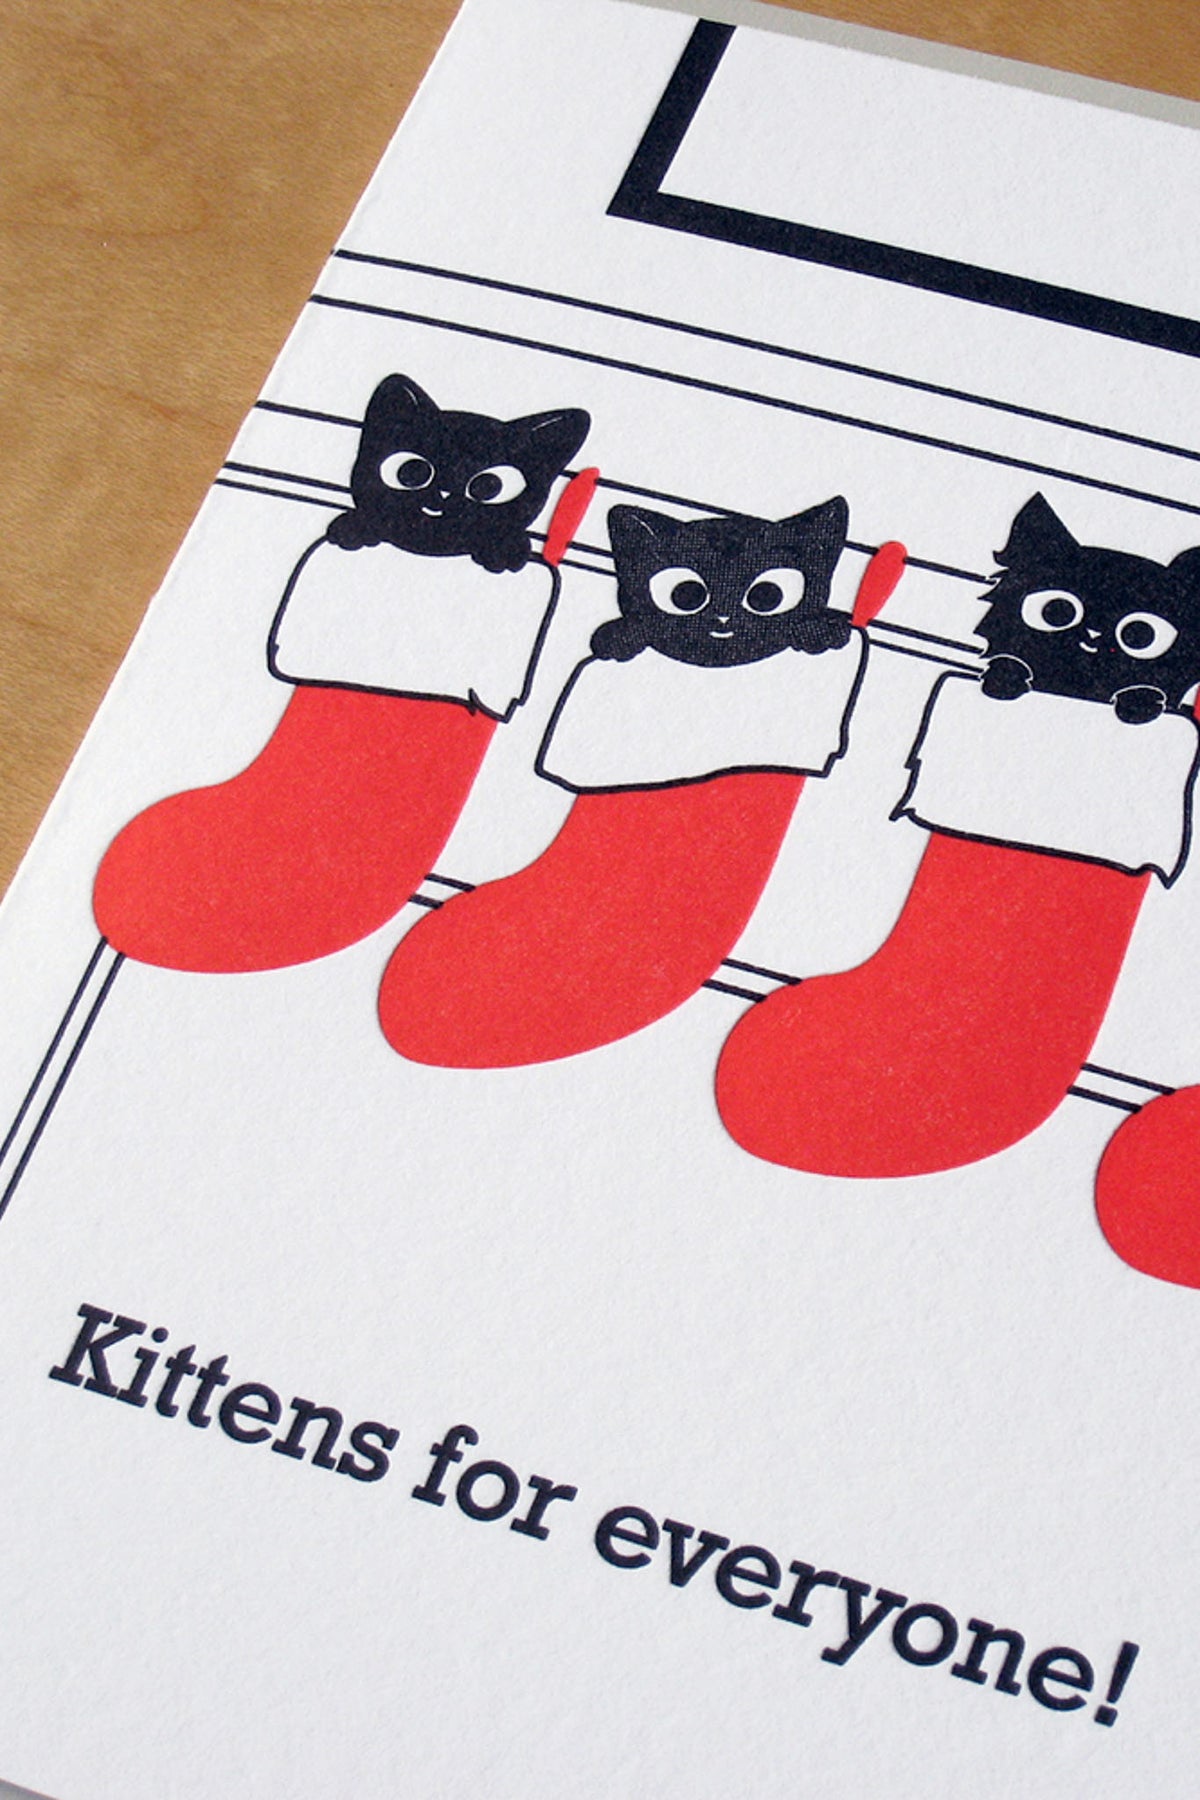 McBitterson&#39;s Kittens for Everyone! Card